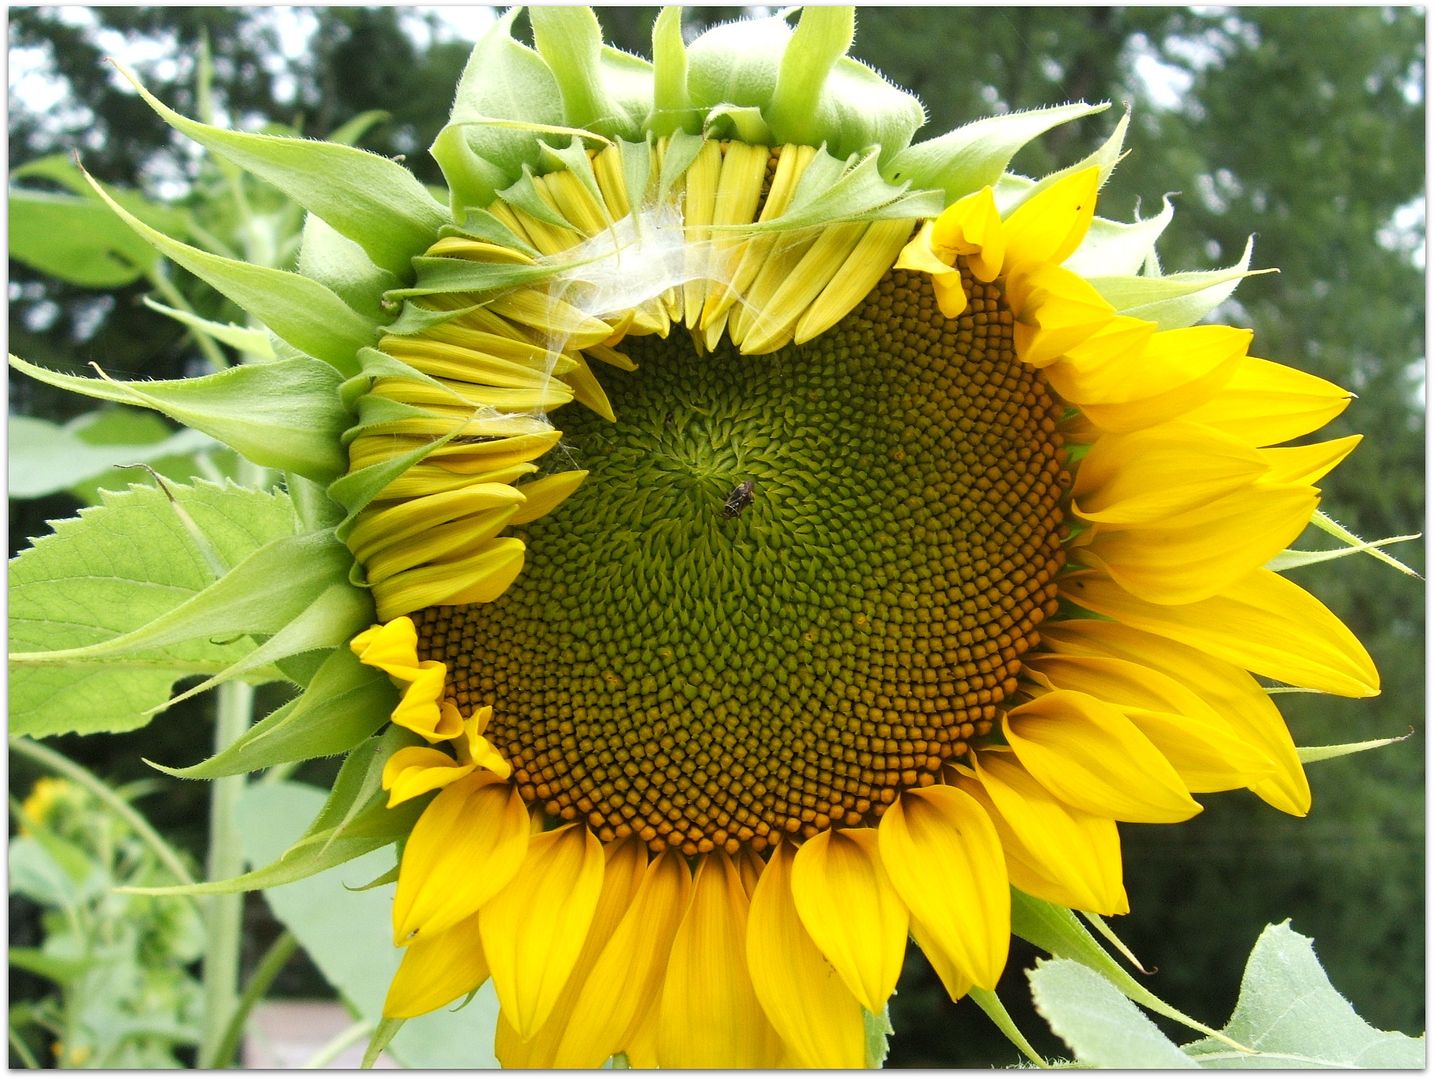 Giant Gray Stripe Sunflower by Angie Ouellette-Tower for godsgrowinggarden.com photo 010_zps9daa47cc.jpg